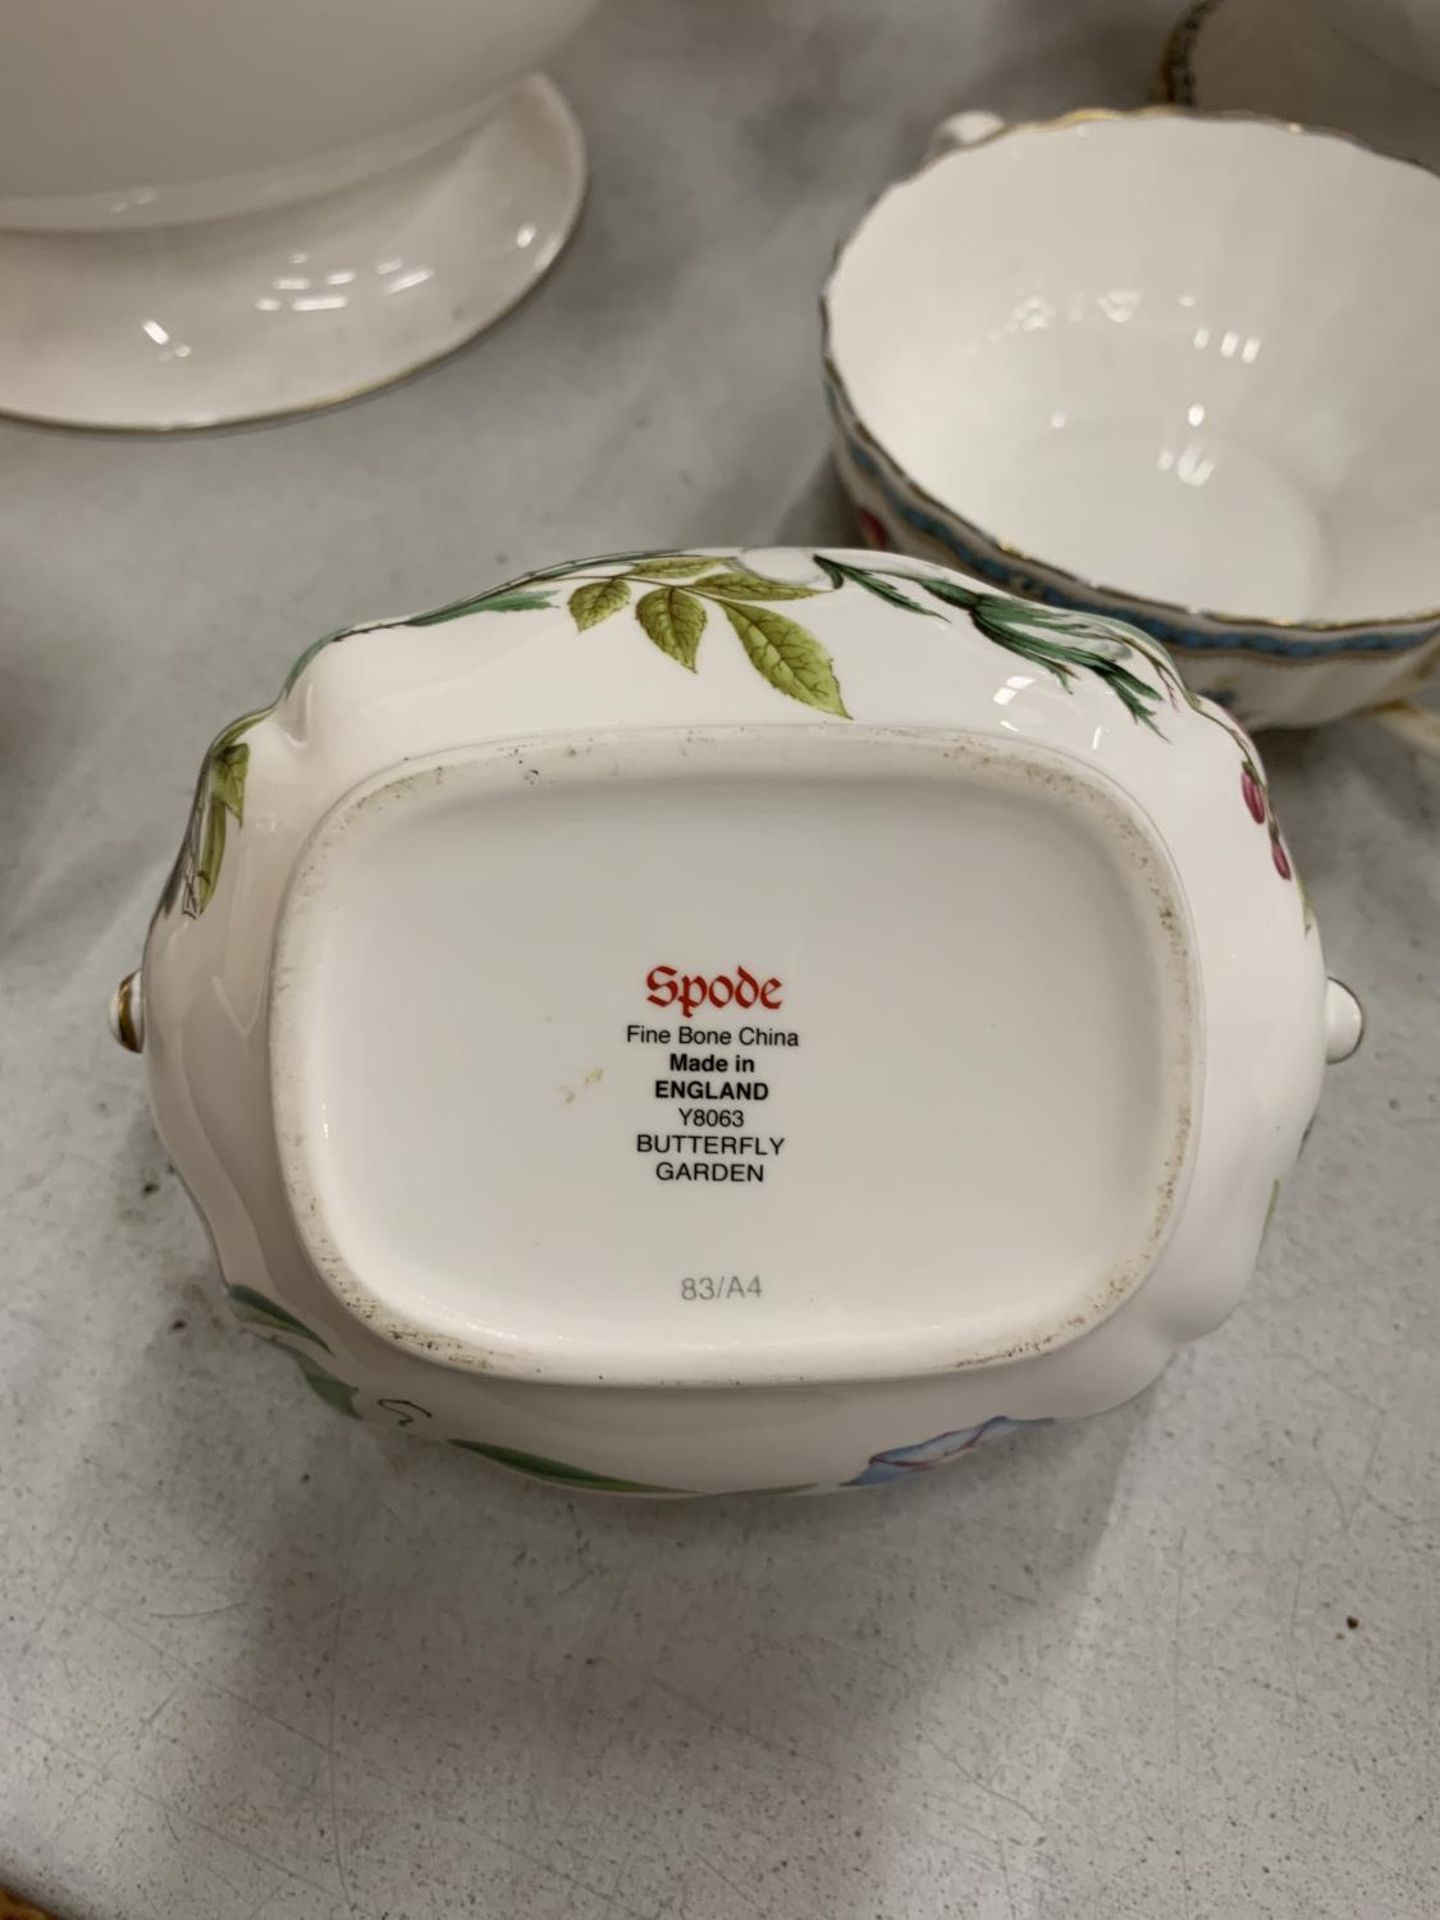 SIX PIECES OF SPODE TO INCLUDE THREE SERVING DISHES, A SOUP COUPE AND TWO SUGAR BOWLS - Image 2 of 3